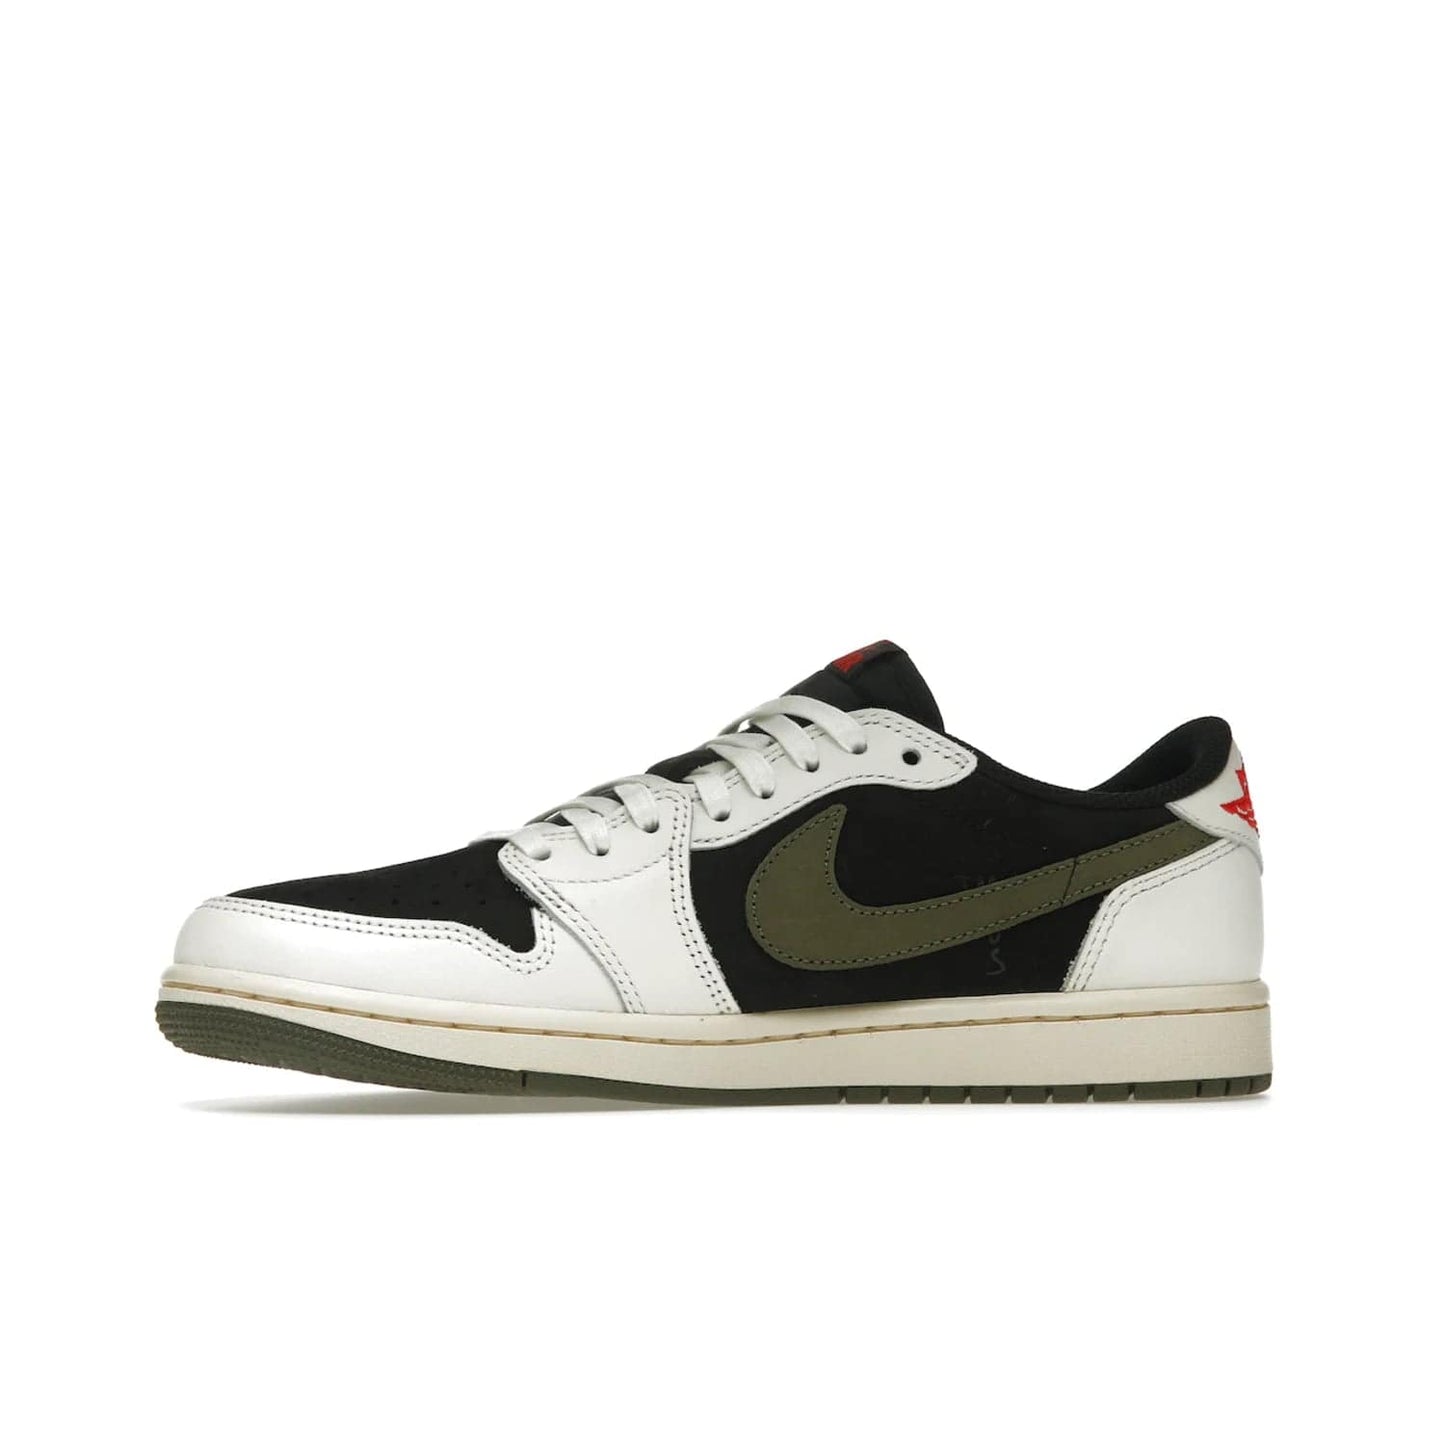 Jordan 1 Retro Low OG SP Travis Scott Olive (Women's) - Image 18 - Only at www.BallersClubKickz.com - Score style points with the Air Jordan 1 Retro Low OG SP Travis Scott Olive exclusively in womens sizing. White leather and black nubuck uppers, plus signature reverse style Nike Swoosh and aged midsole atop olive green outsole. Stand out with these stylish and eye-catching sneakers, dropping April 26, 2023.